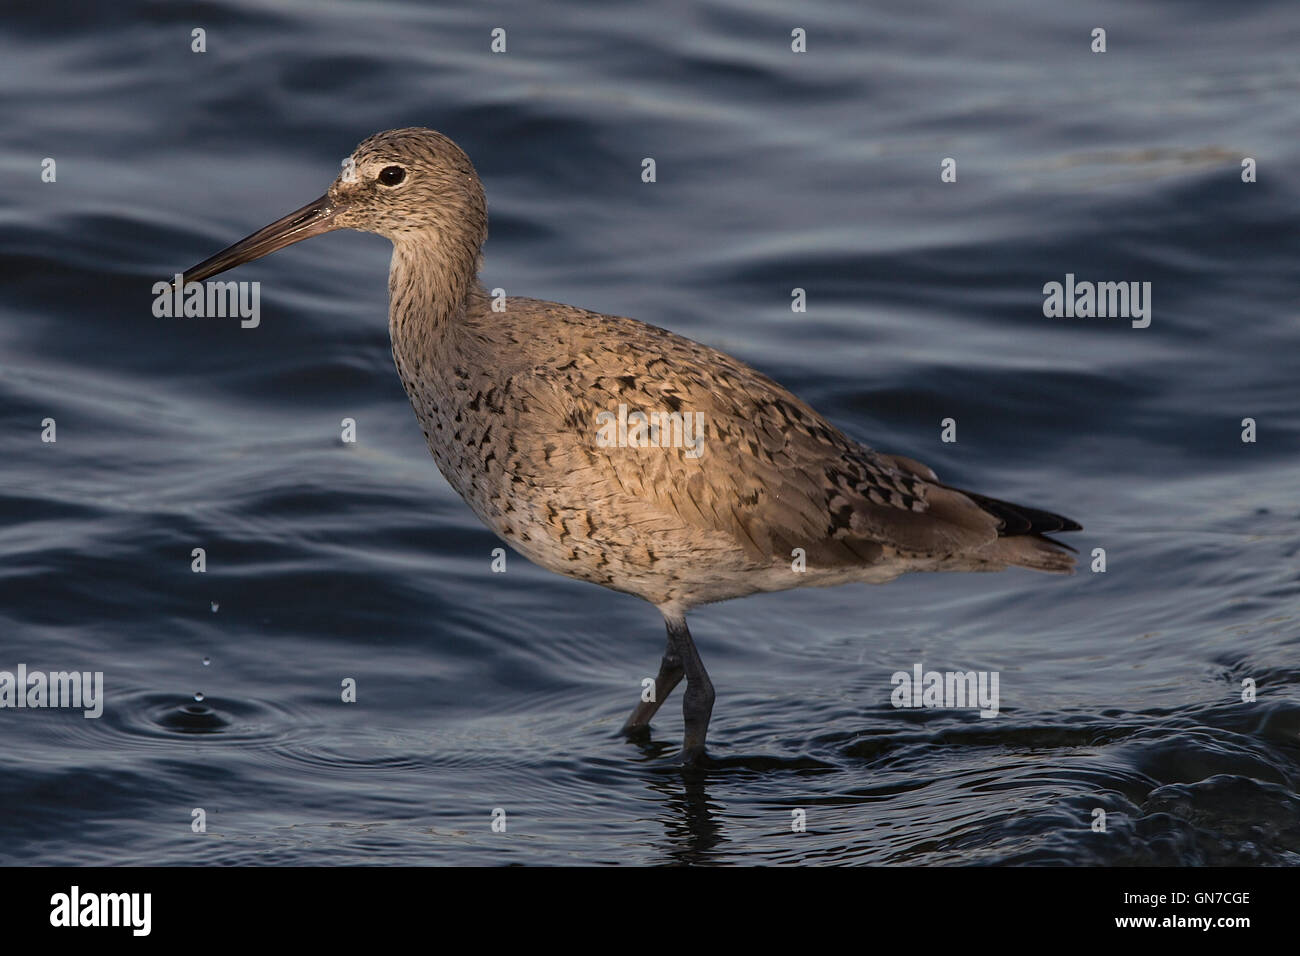 Long-billed Dowitcher (Limnodromus scolopaceus), Shoreline Park, Mountain View, California, United States of America Stock Photo